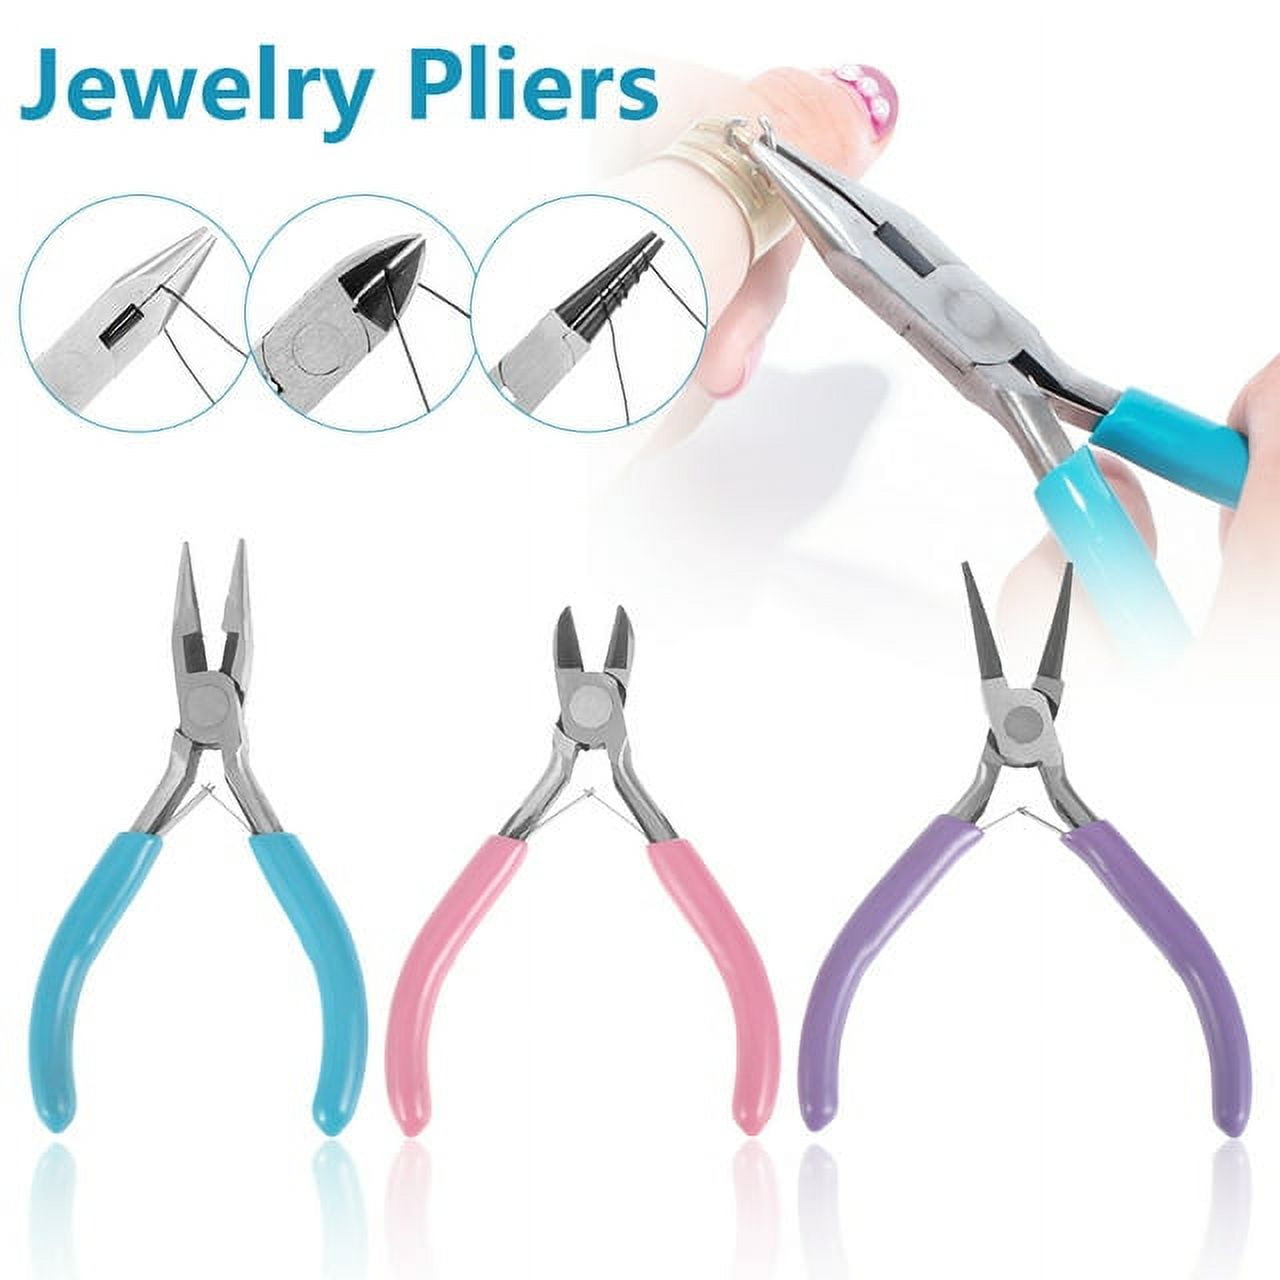 Jewelry Pliers Set 3 Pieces, BeadSmith® COLOR I.D